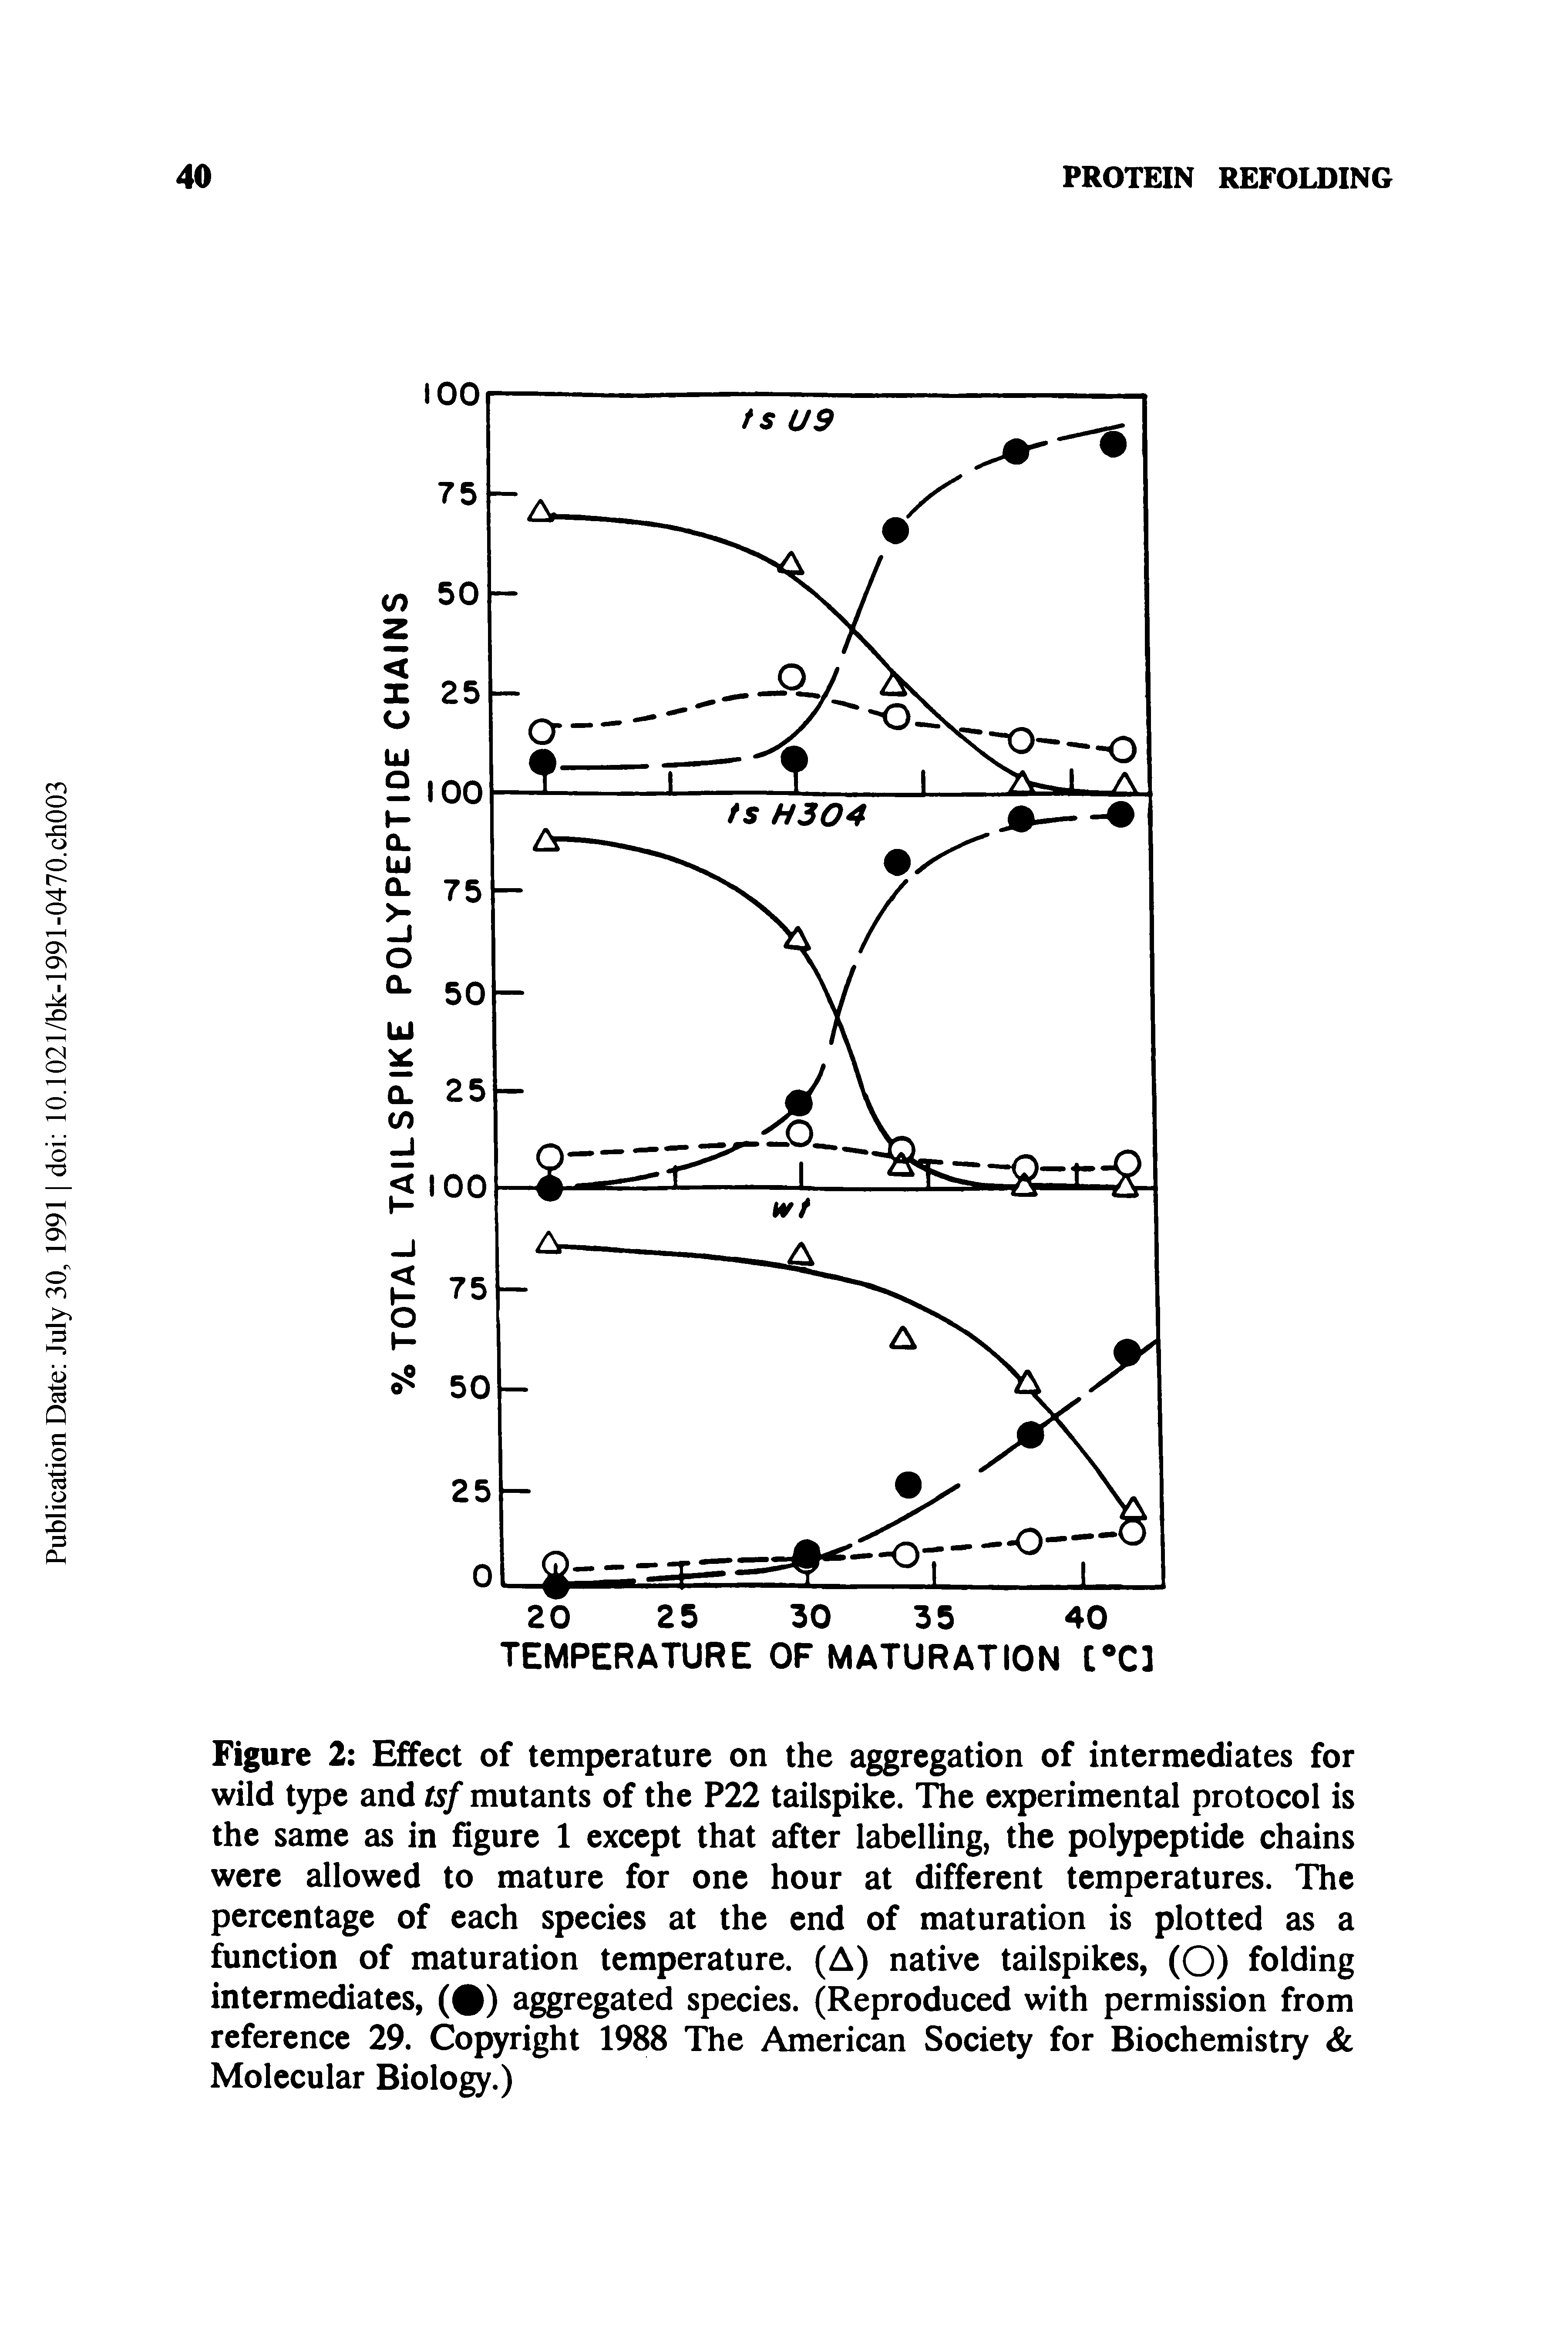 Figure 2 Effect of temperature on the aggregation of intermediates for wild type and tsf mutants of the P22 tailspike. The experimental protocol is the same as in figure 1 except that after labelling, the polypeptide chains were allowed to mature for one hour at different temperatures. The percentage of each species at the end of maturation is plotted as a function of maturation temperature. (A) native tailspikes, (O) folding intermediates, ( ) aggregated species. (Reproduced with permission from reference 29. Copyright 1988 The American Society for Biochemistry Molecular Biology.)...